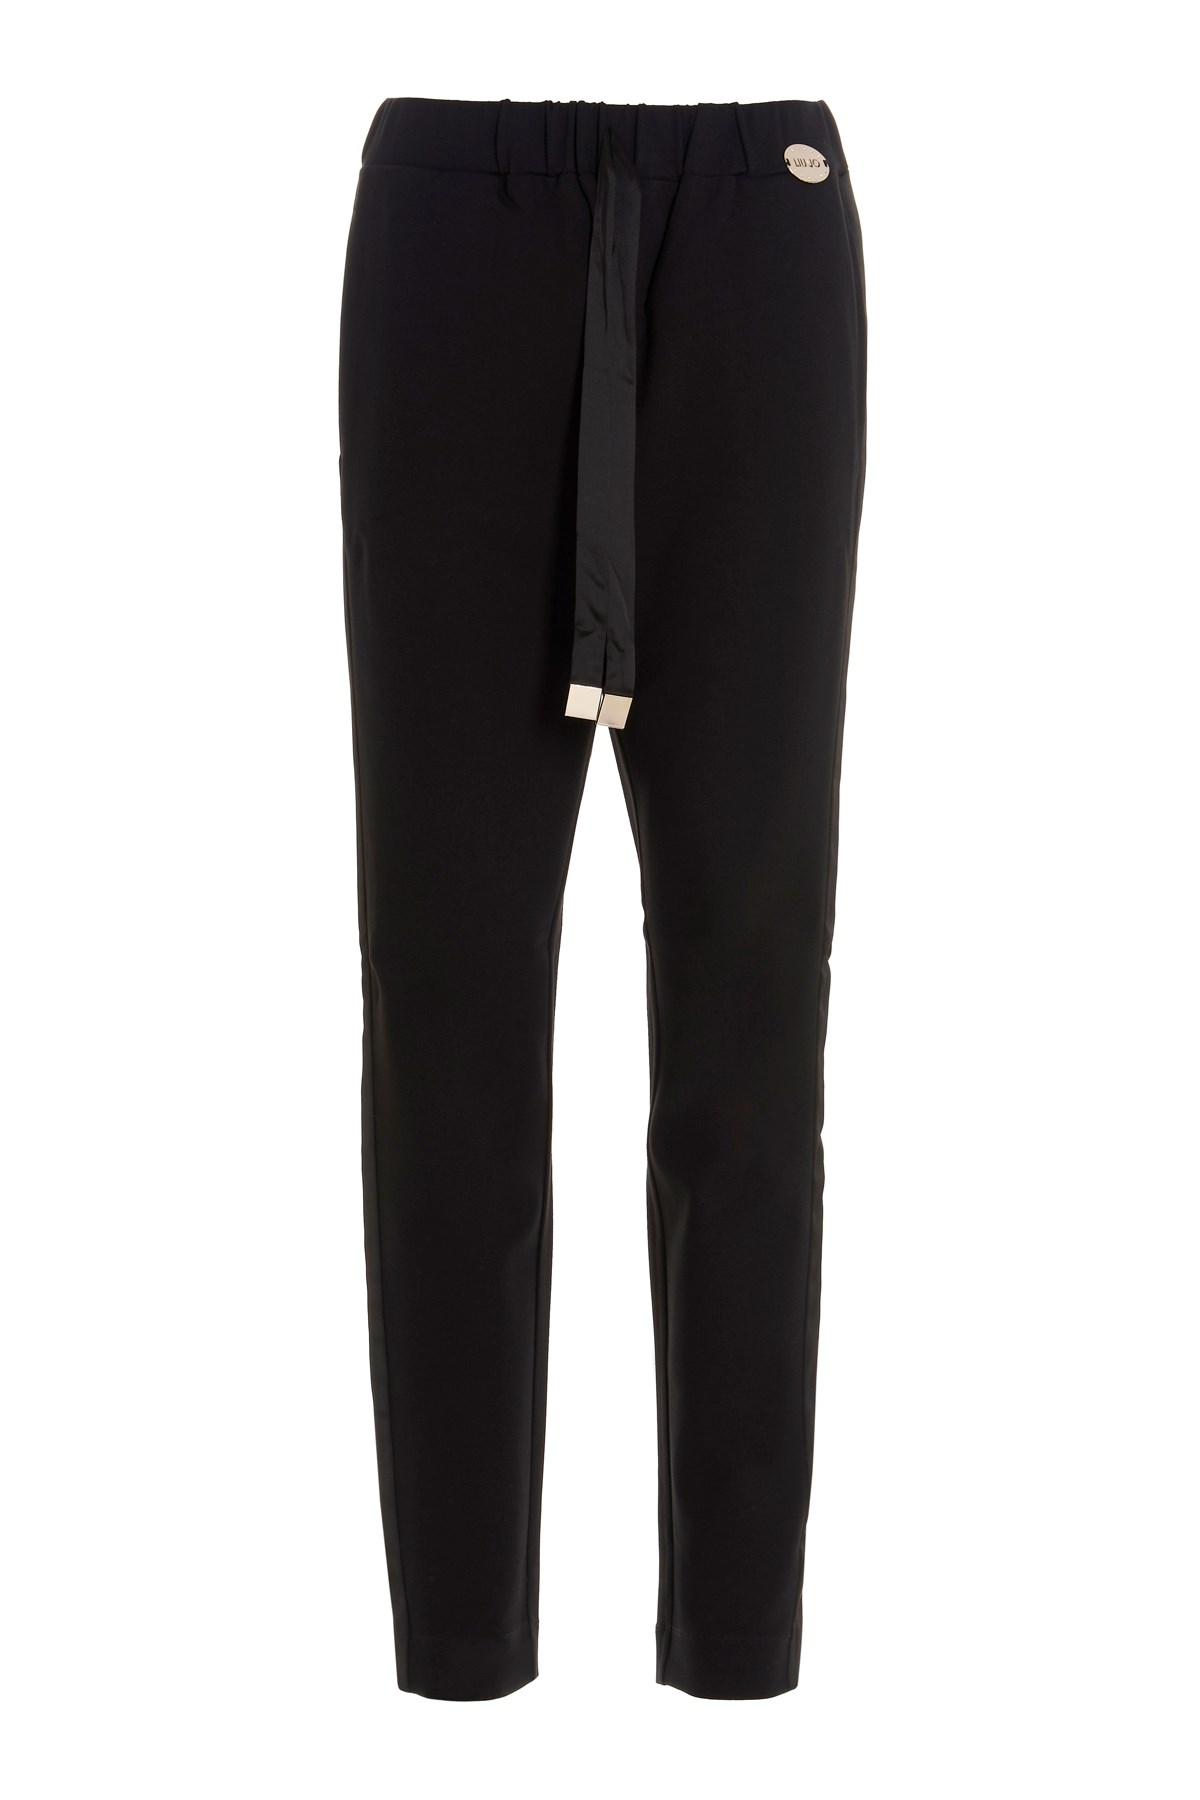 LIU JO Trousers With Side Band